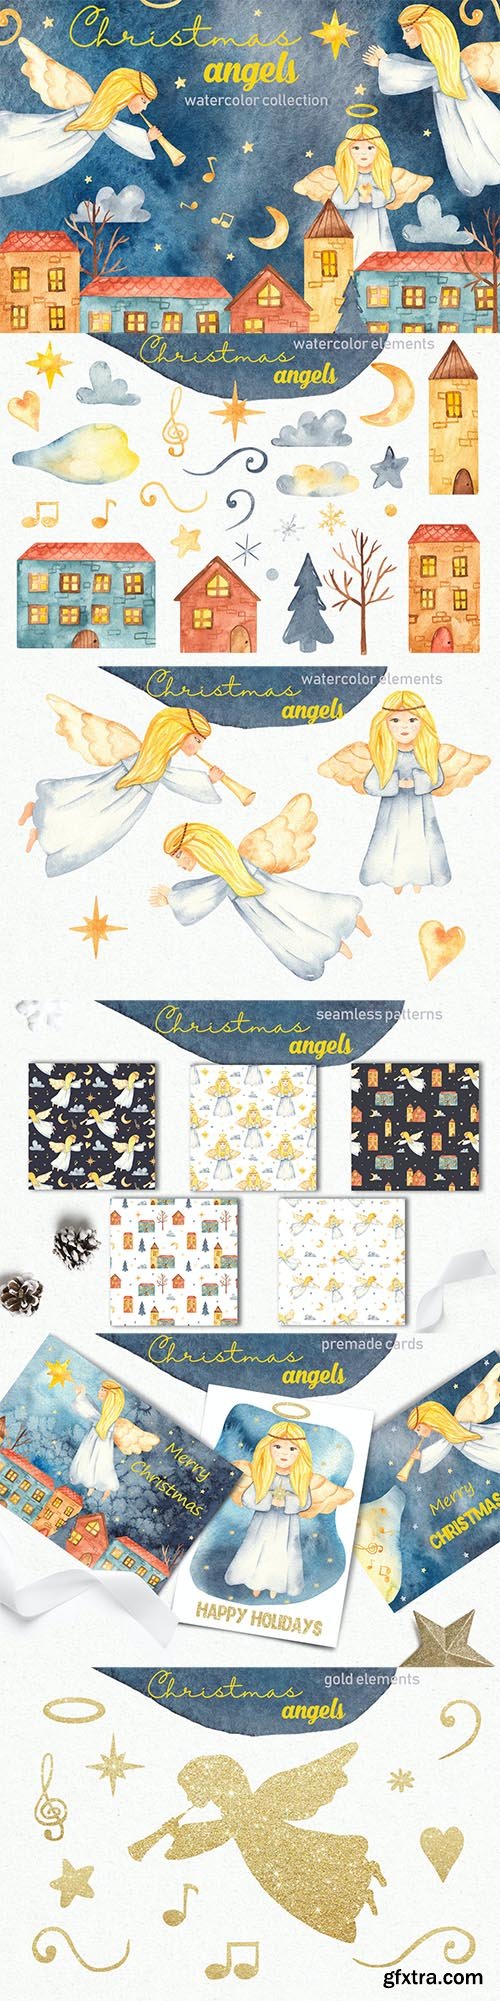 Watercolor Christmas Angels. Clipart, cards